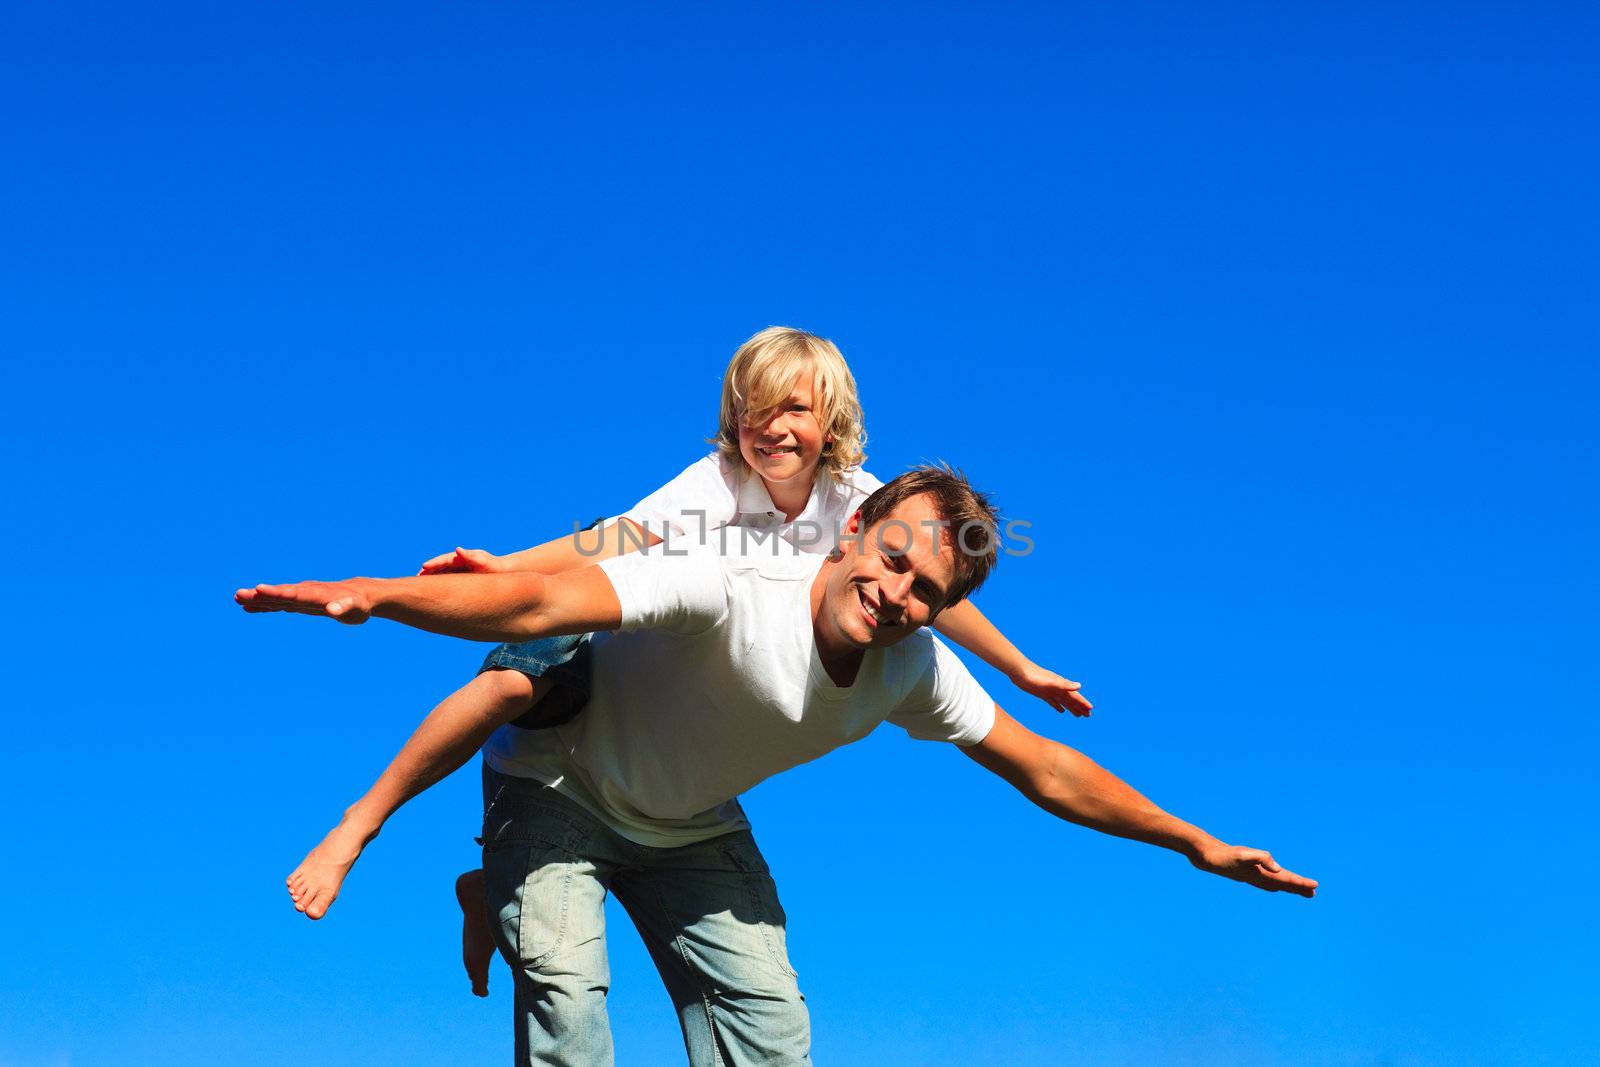 Child on father's back playing airplane by Wavebreakmedia